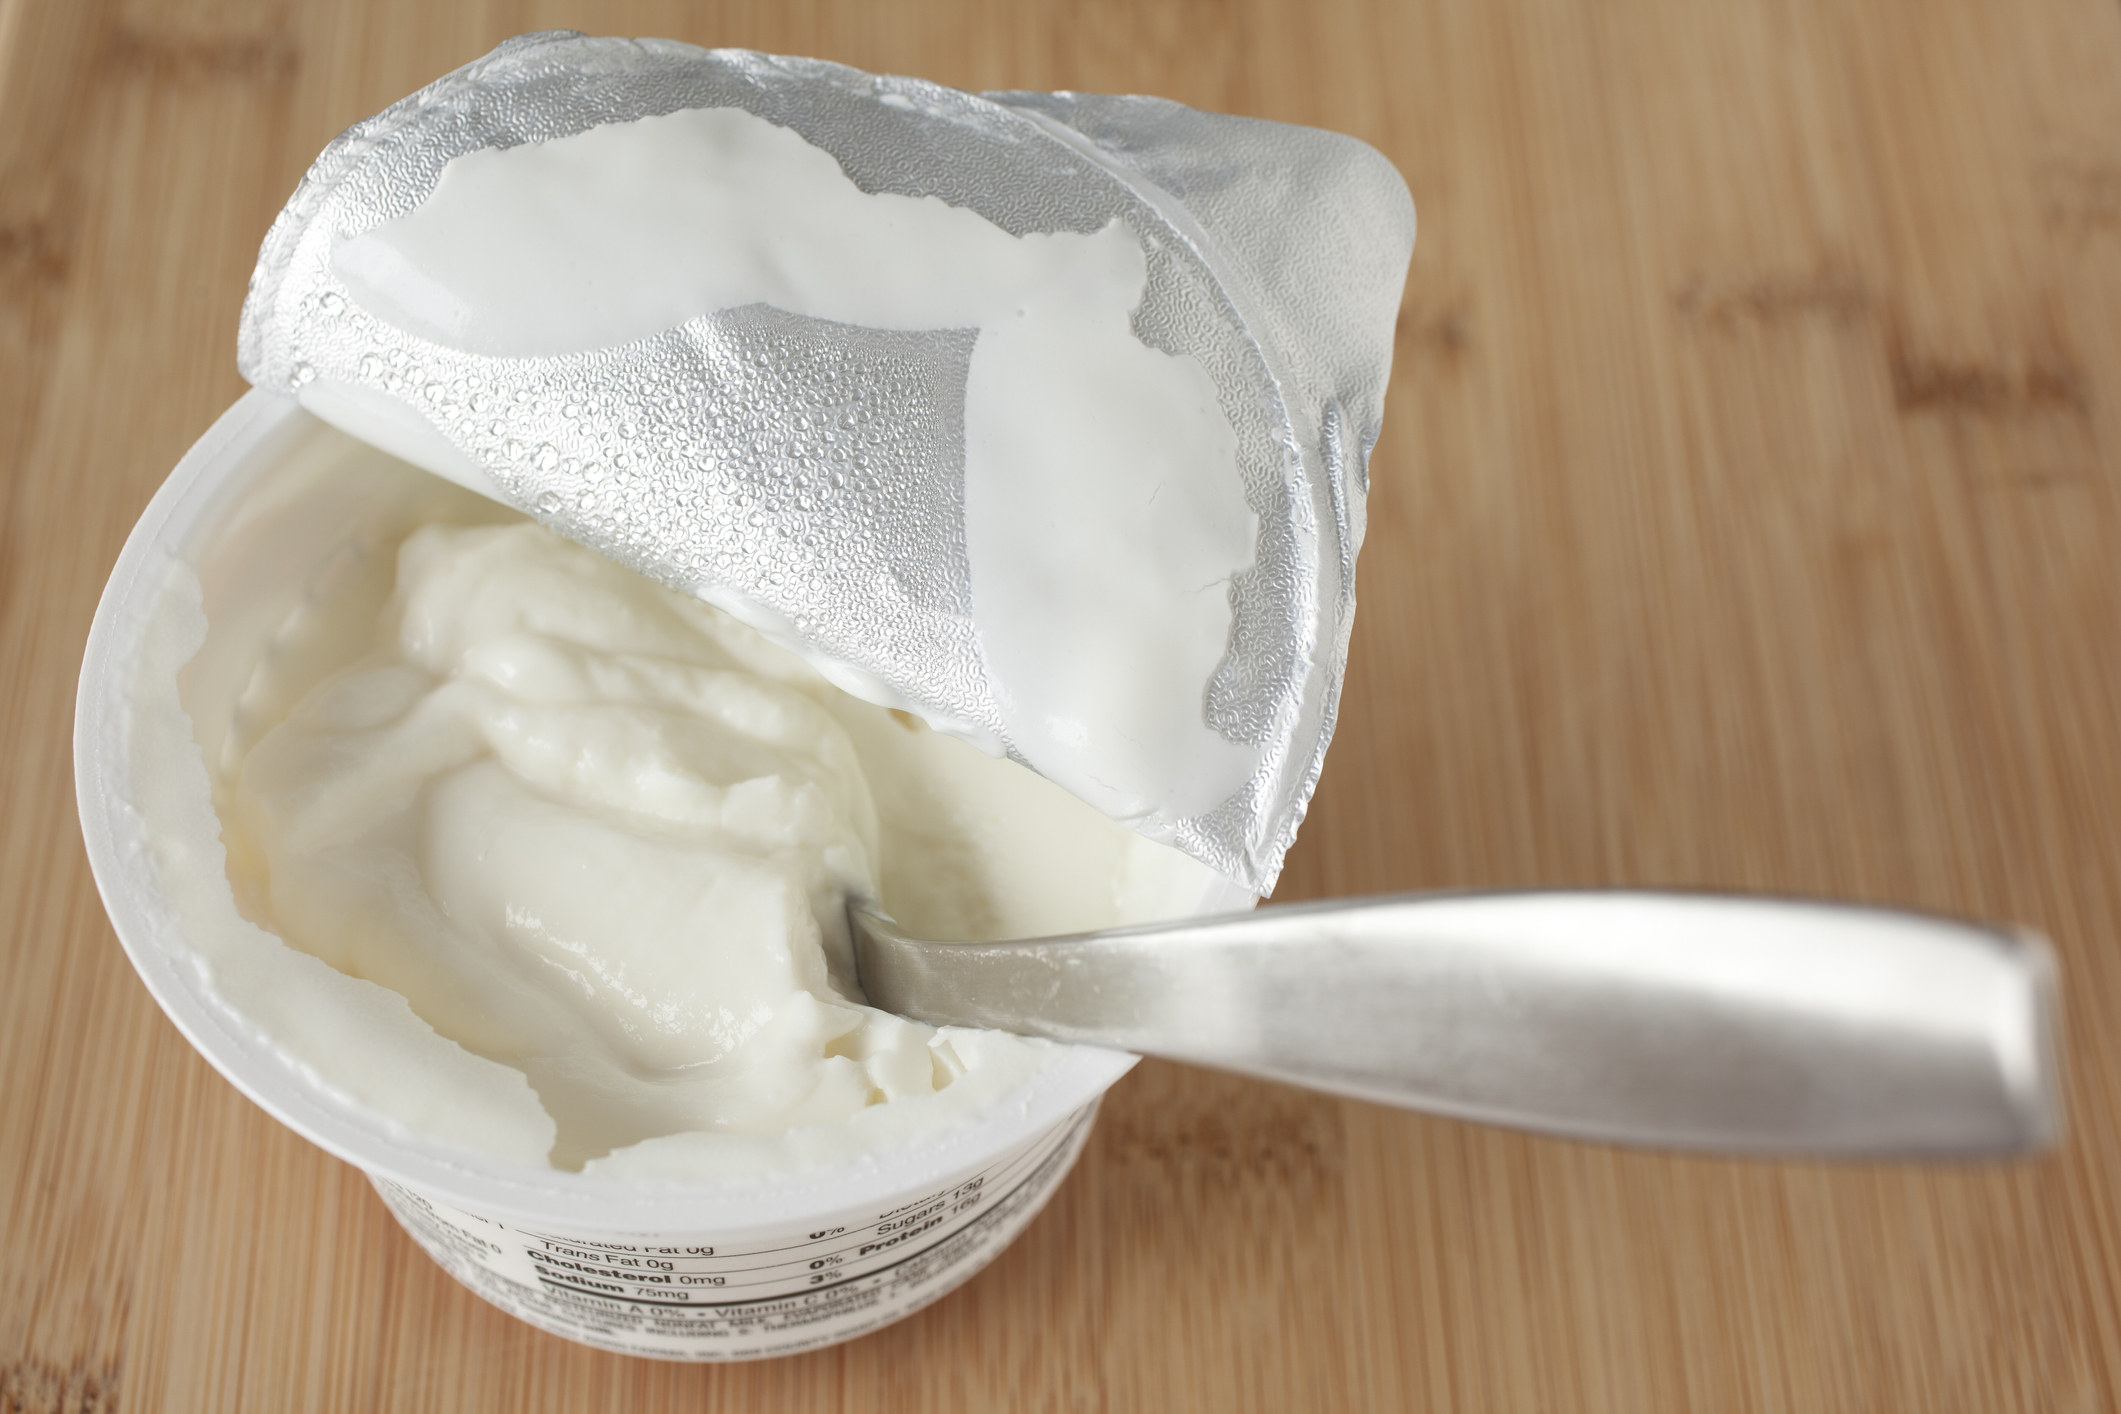 A small container of greek yogurt with a spoon in it